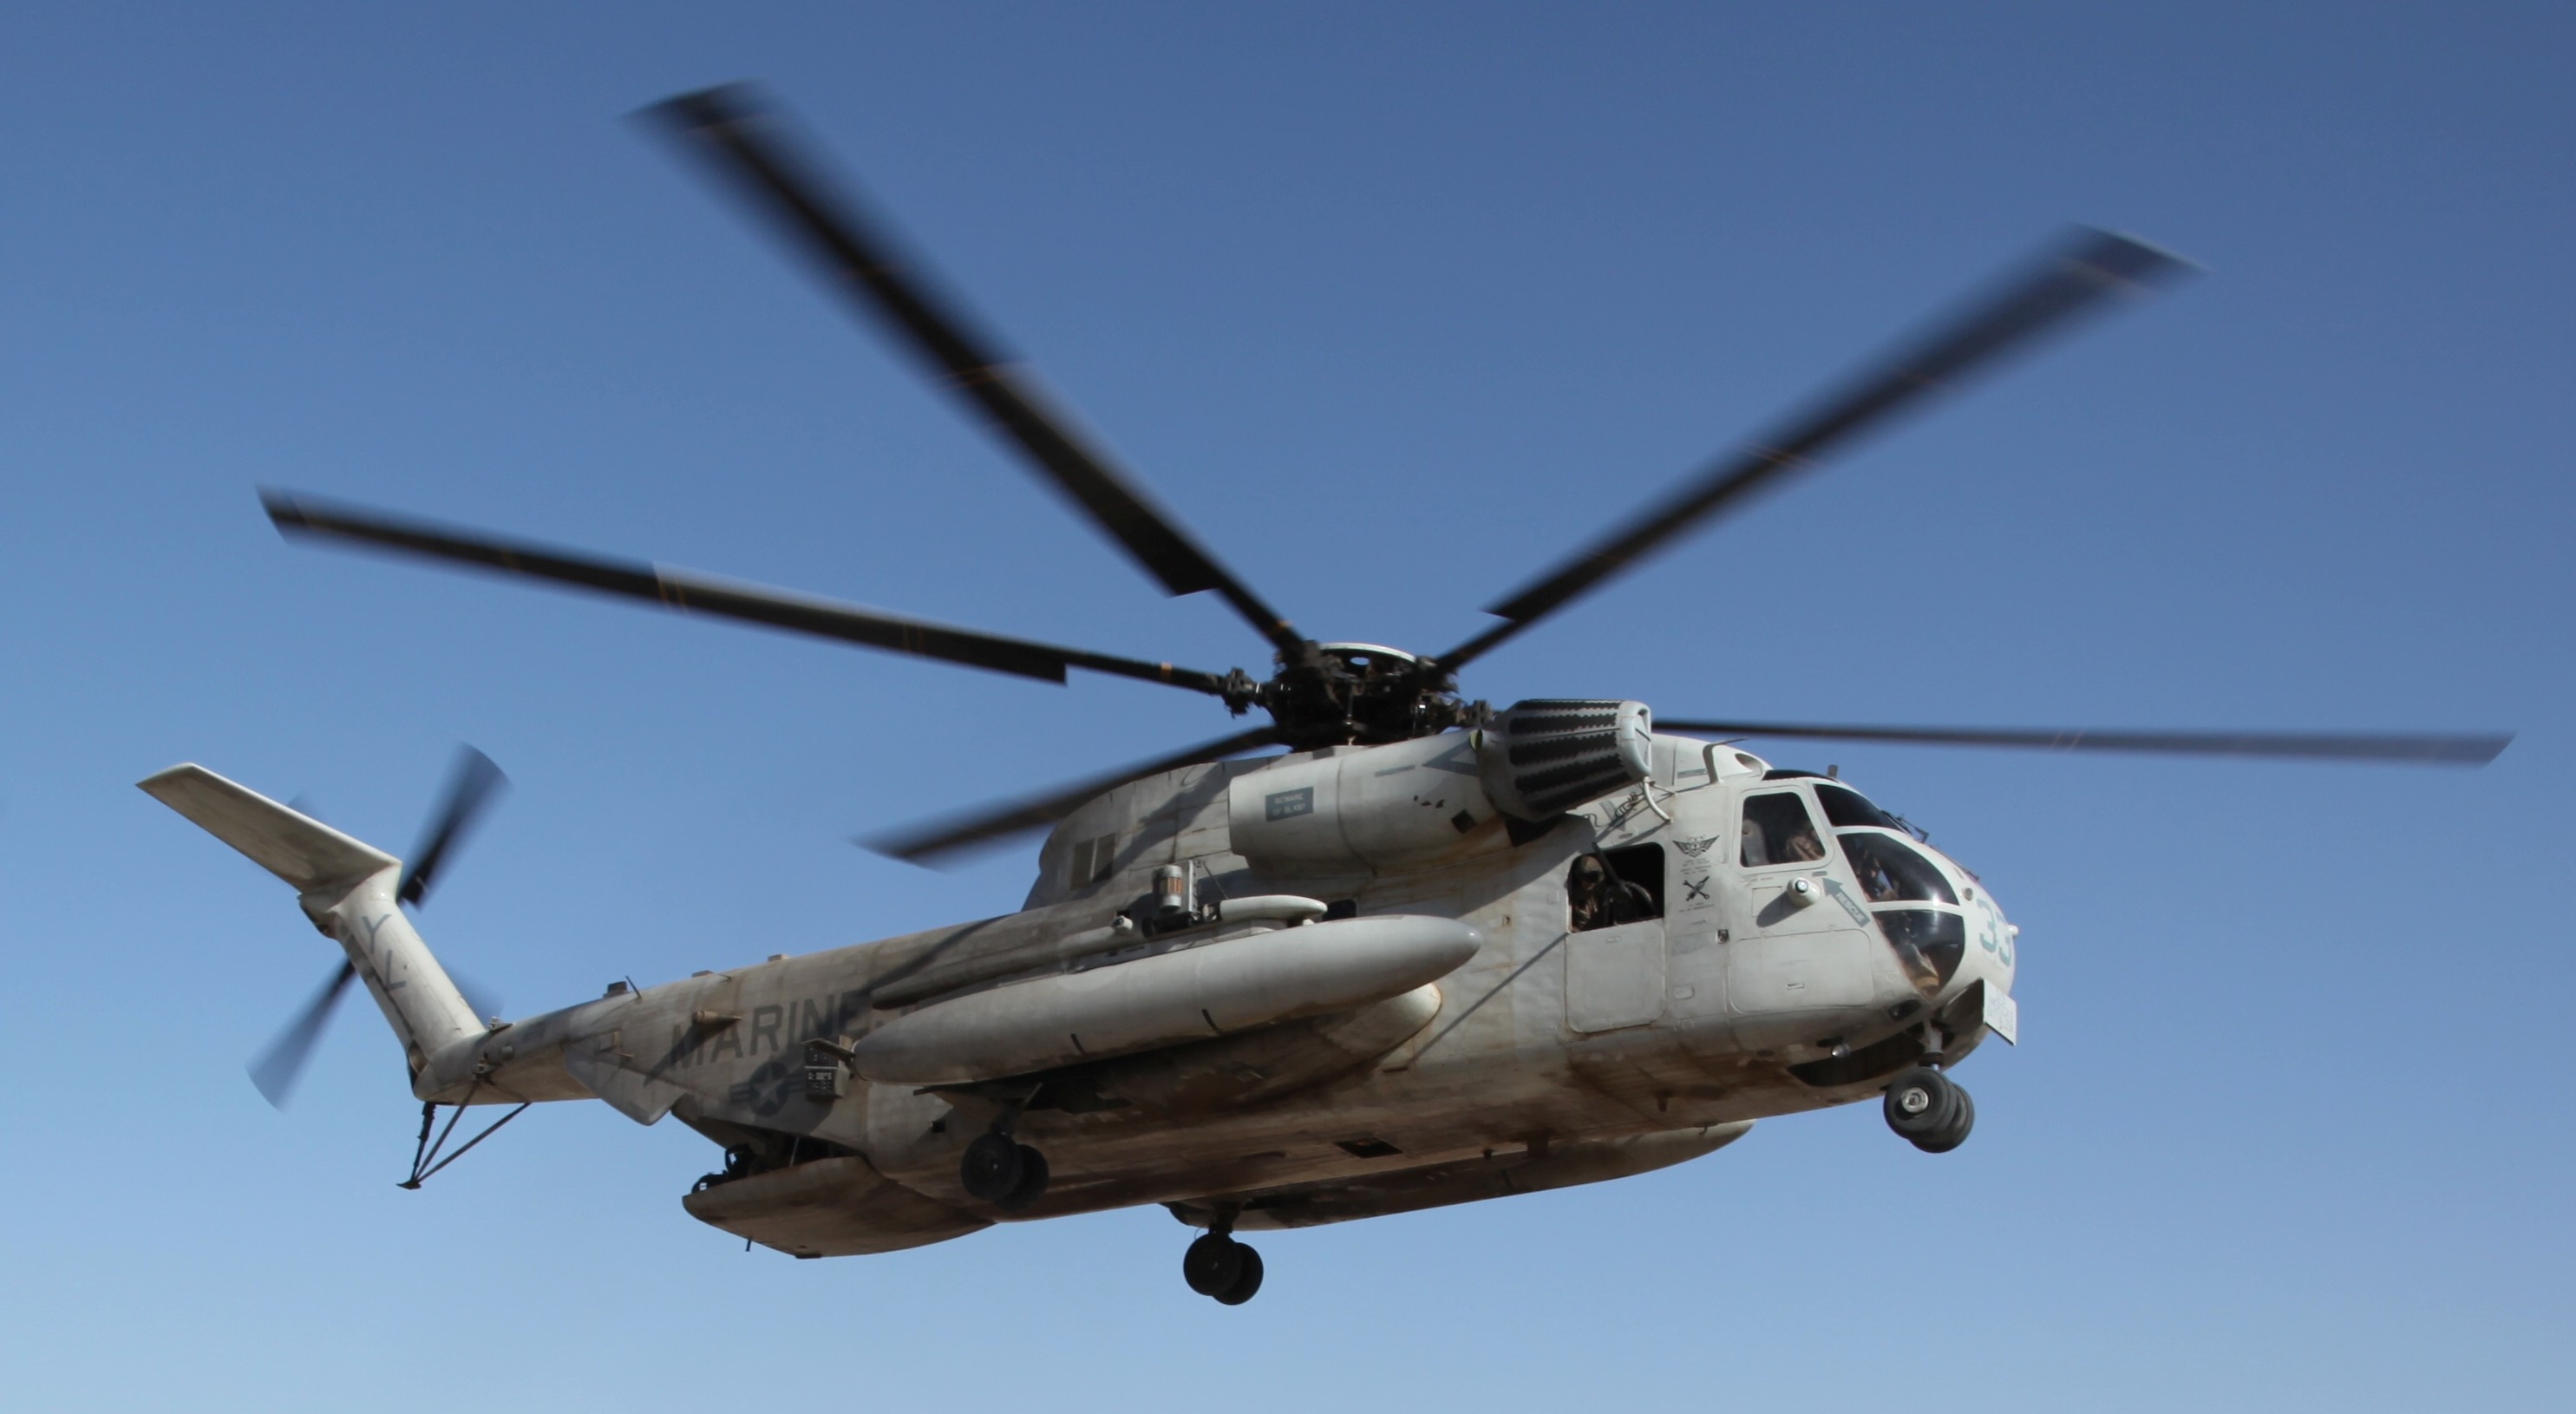 hmh-362 ugly angels marine heavy helicopter squadron usmc sikorsky ch-53d sea stallion mcas miramar 13x